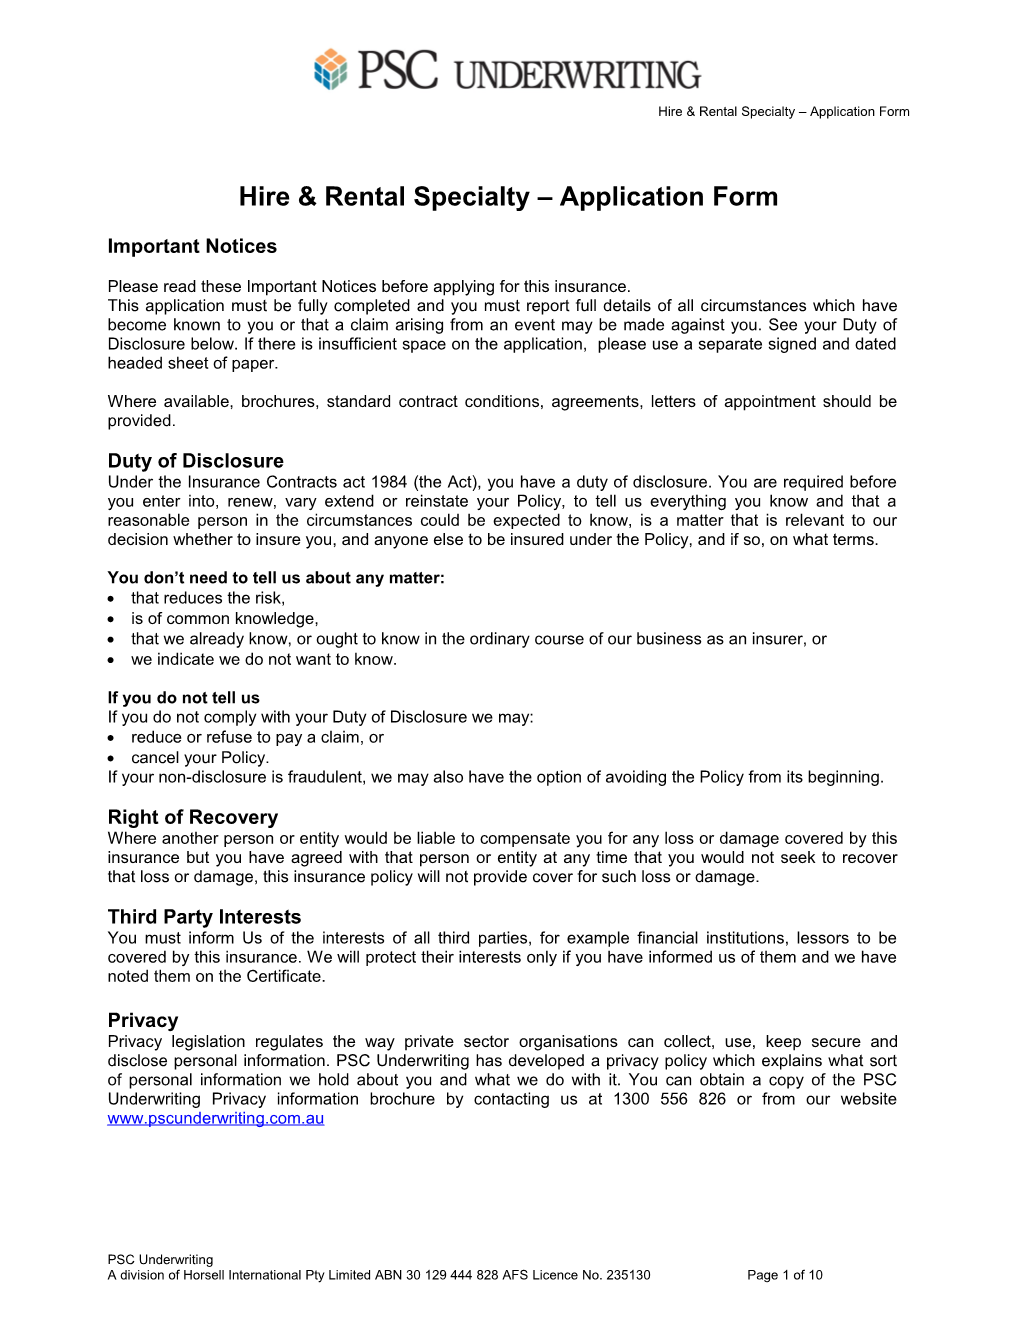 Hire & Rental Specialty Application Form